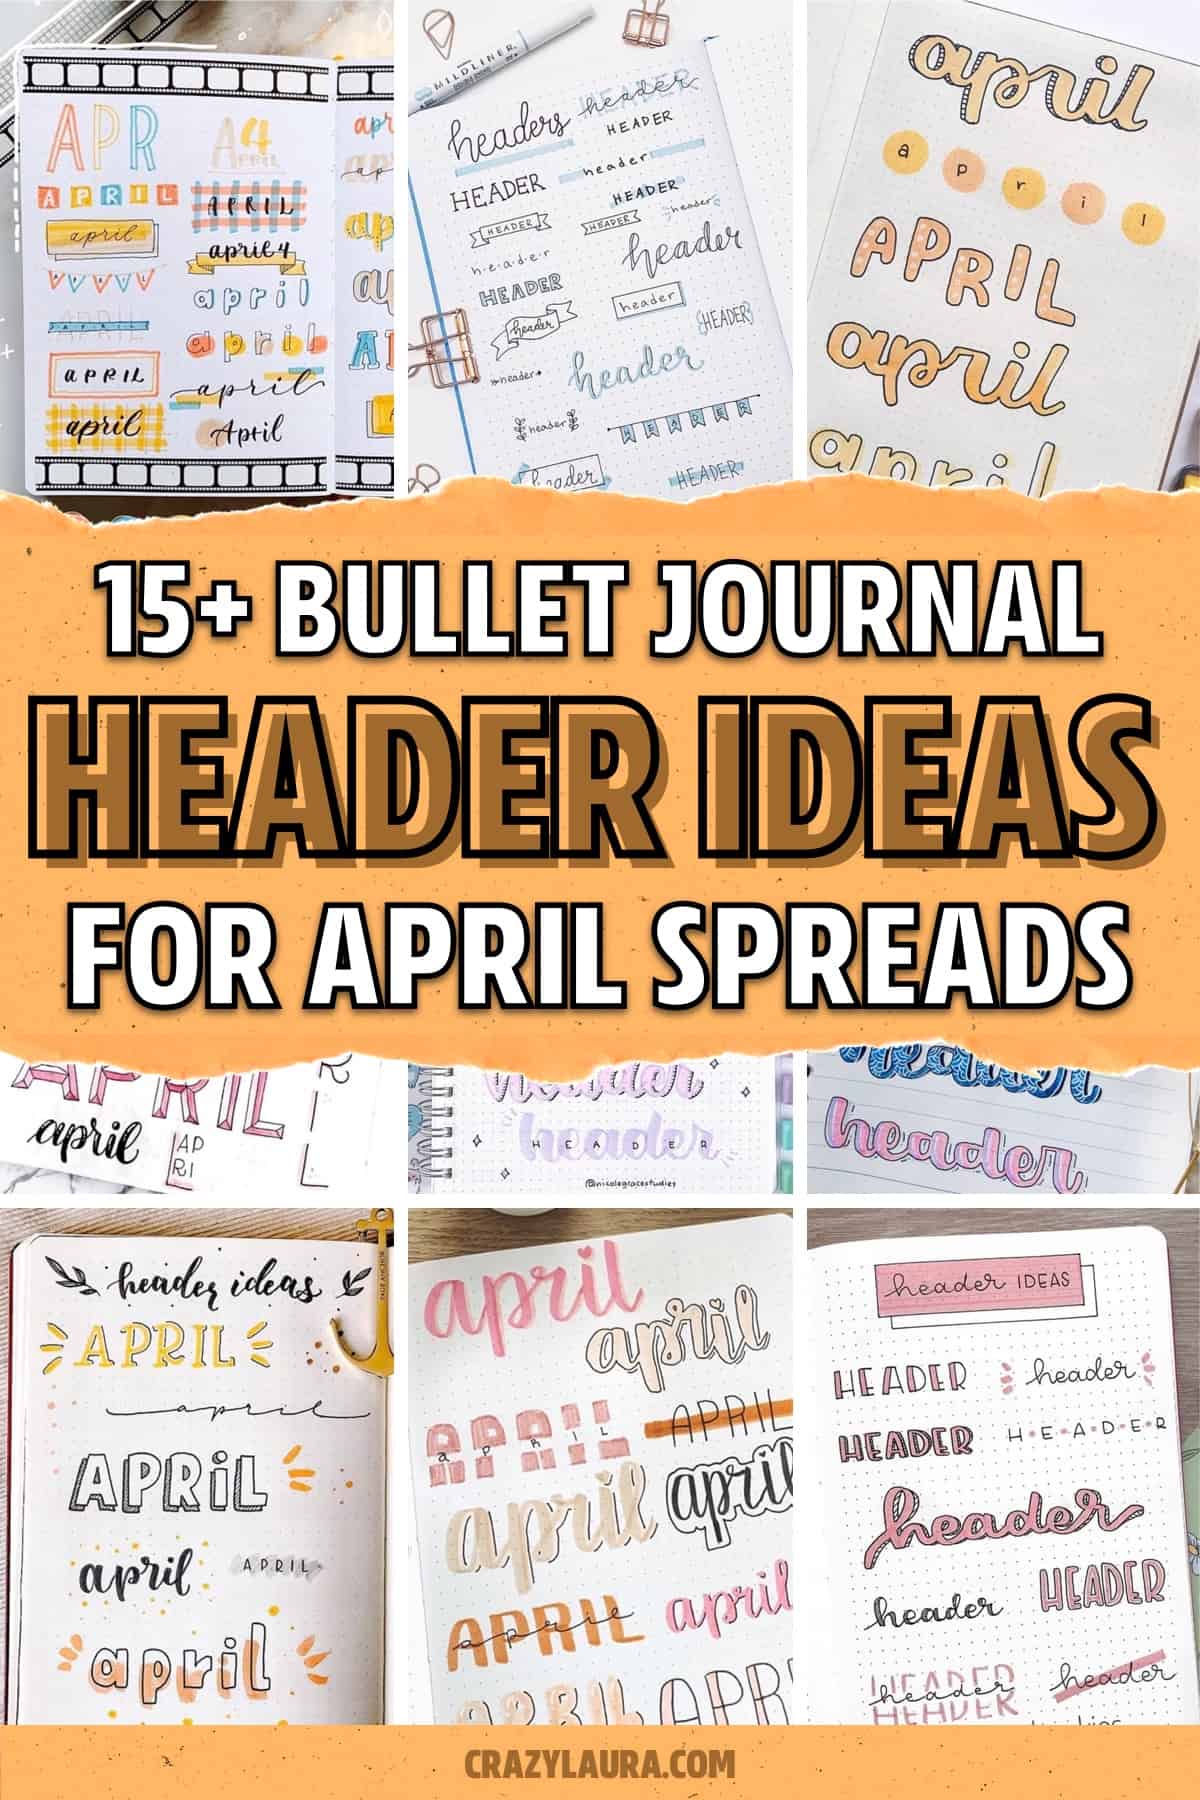 title examples for spring bullet journal